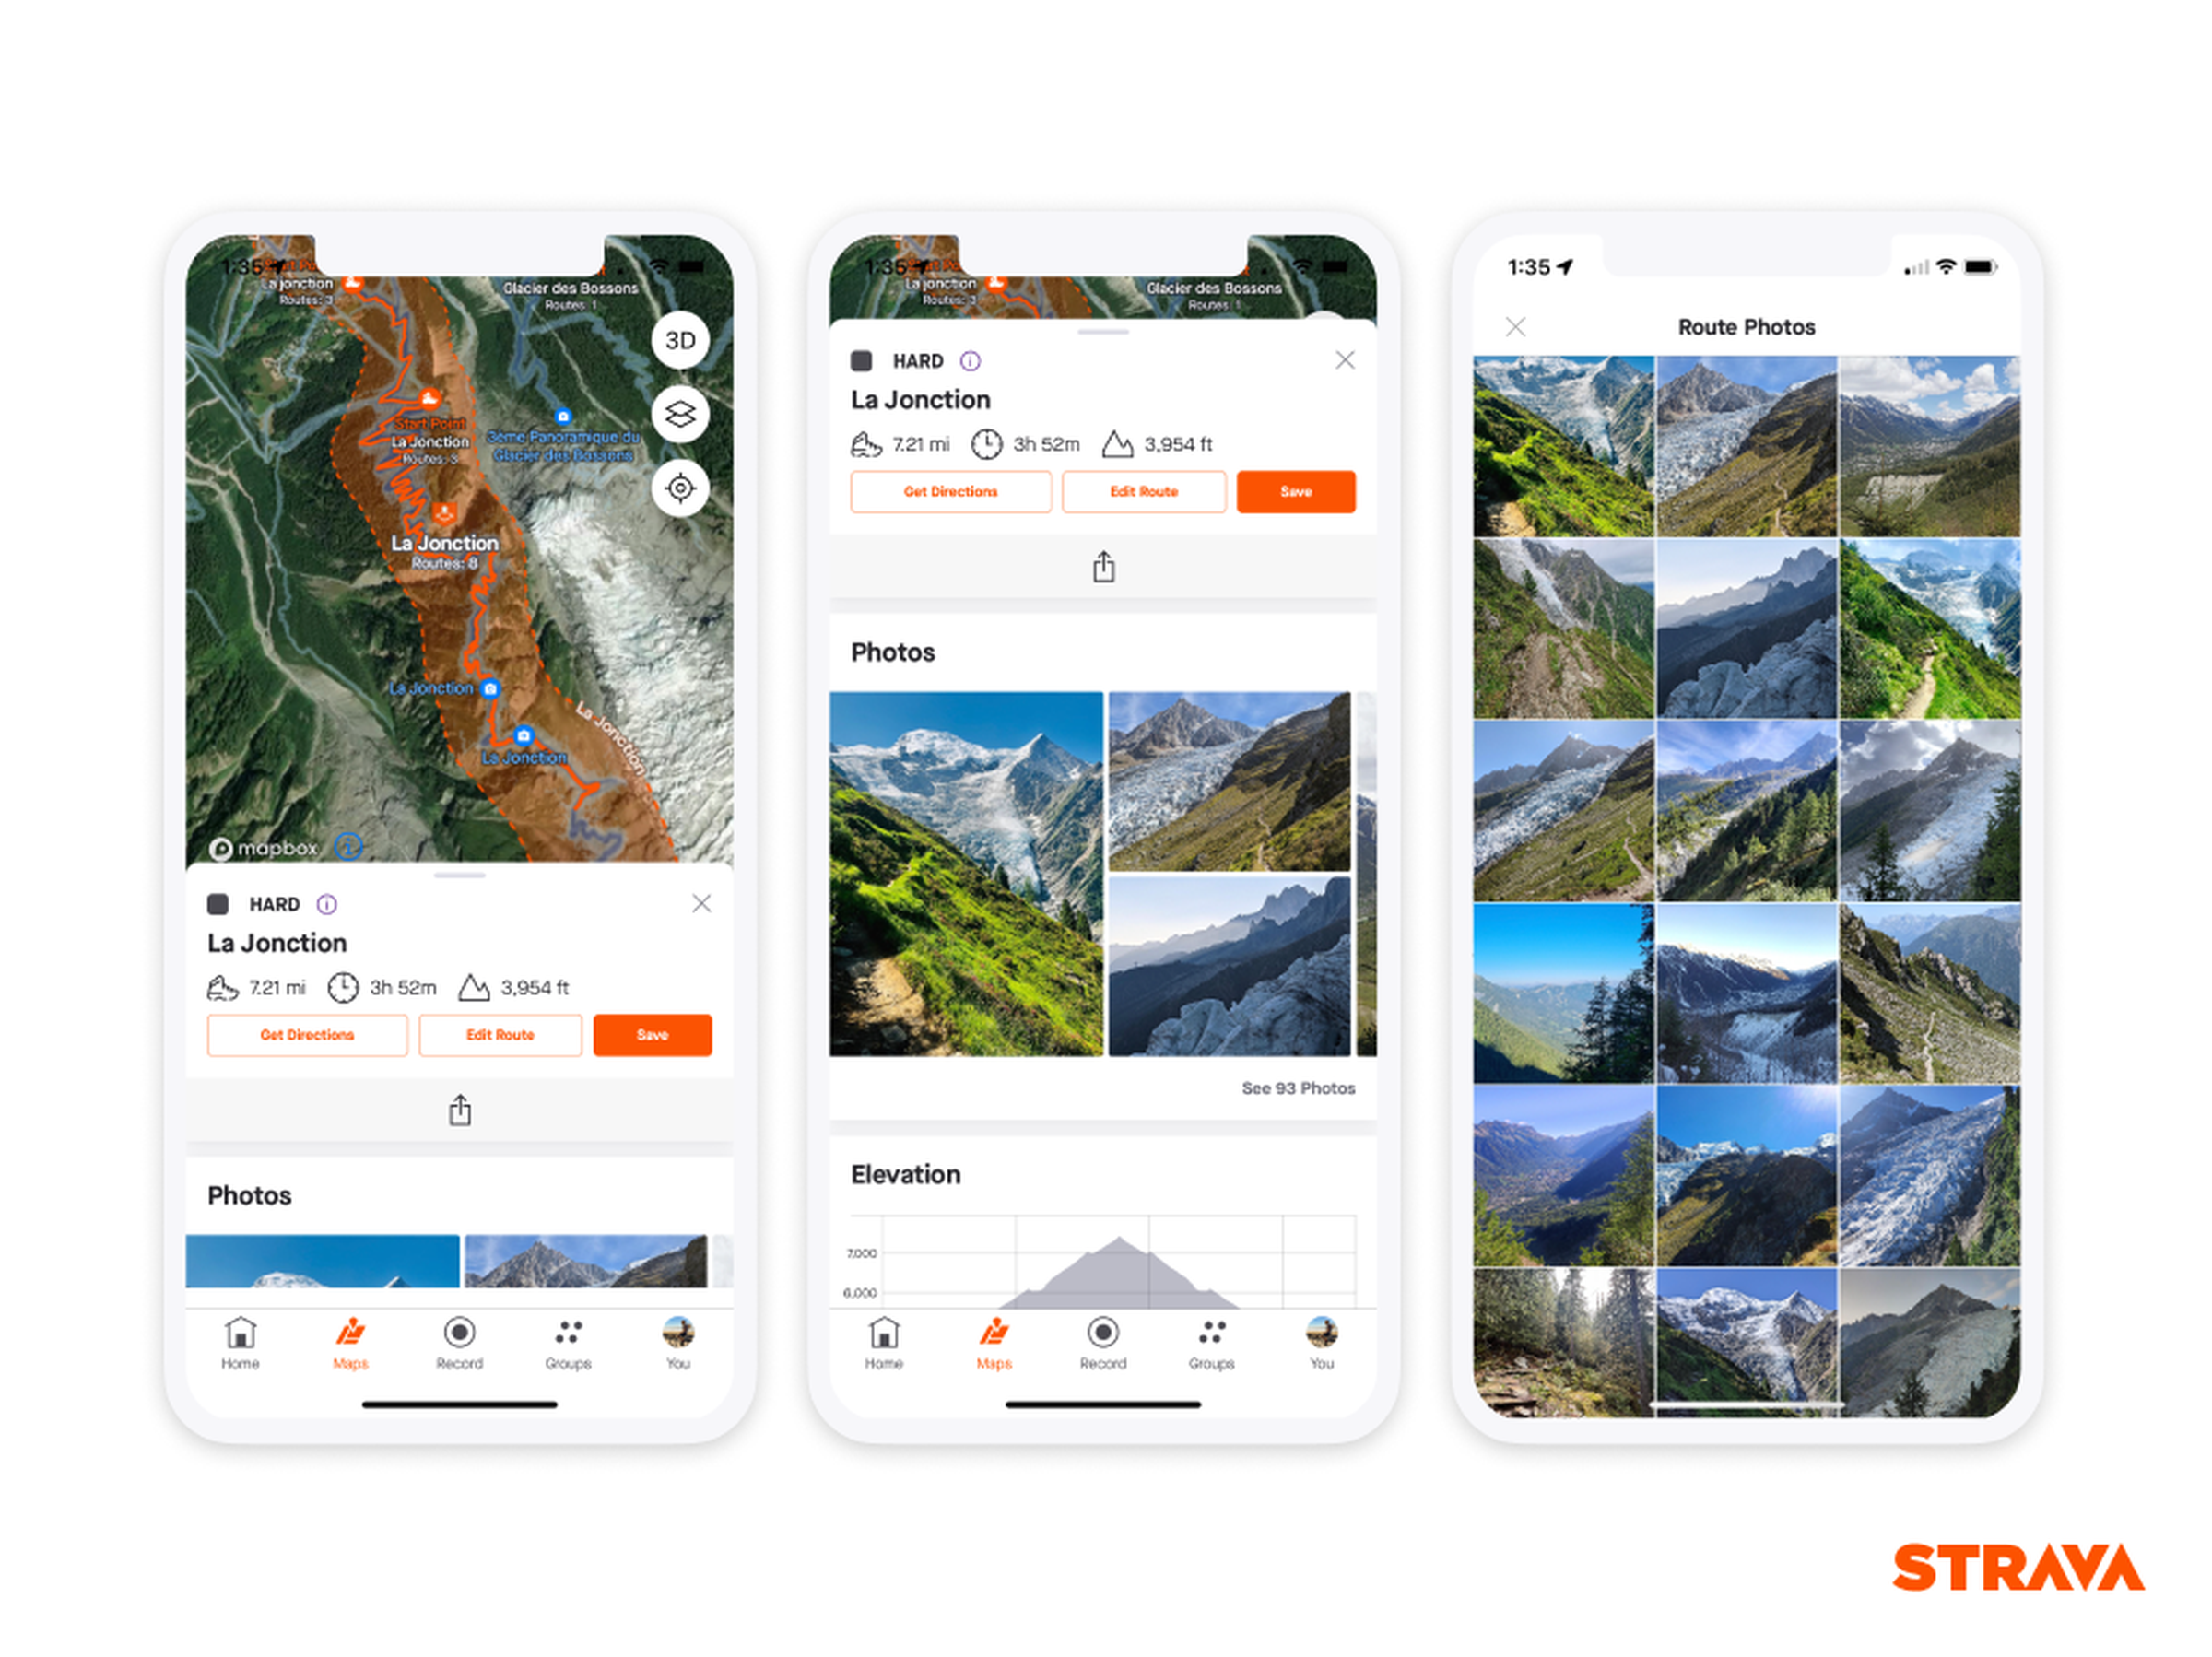 Strava rendering showing three different views of the photos displayed in the recommended routes feature.